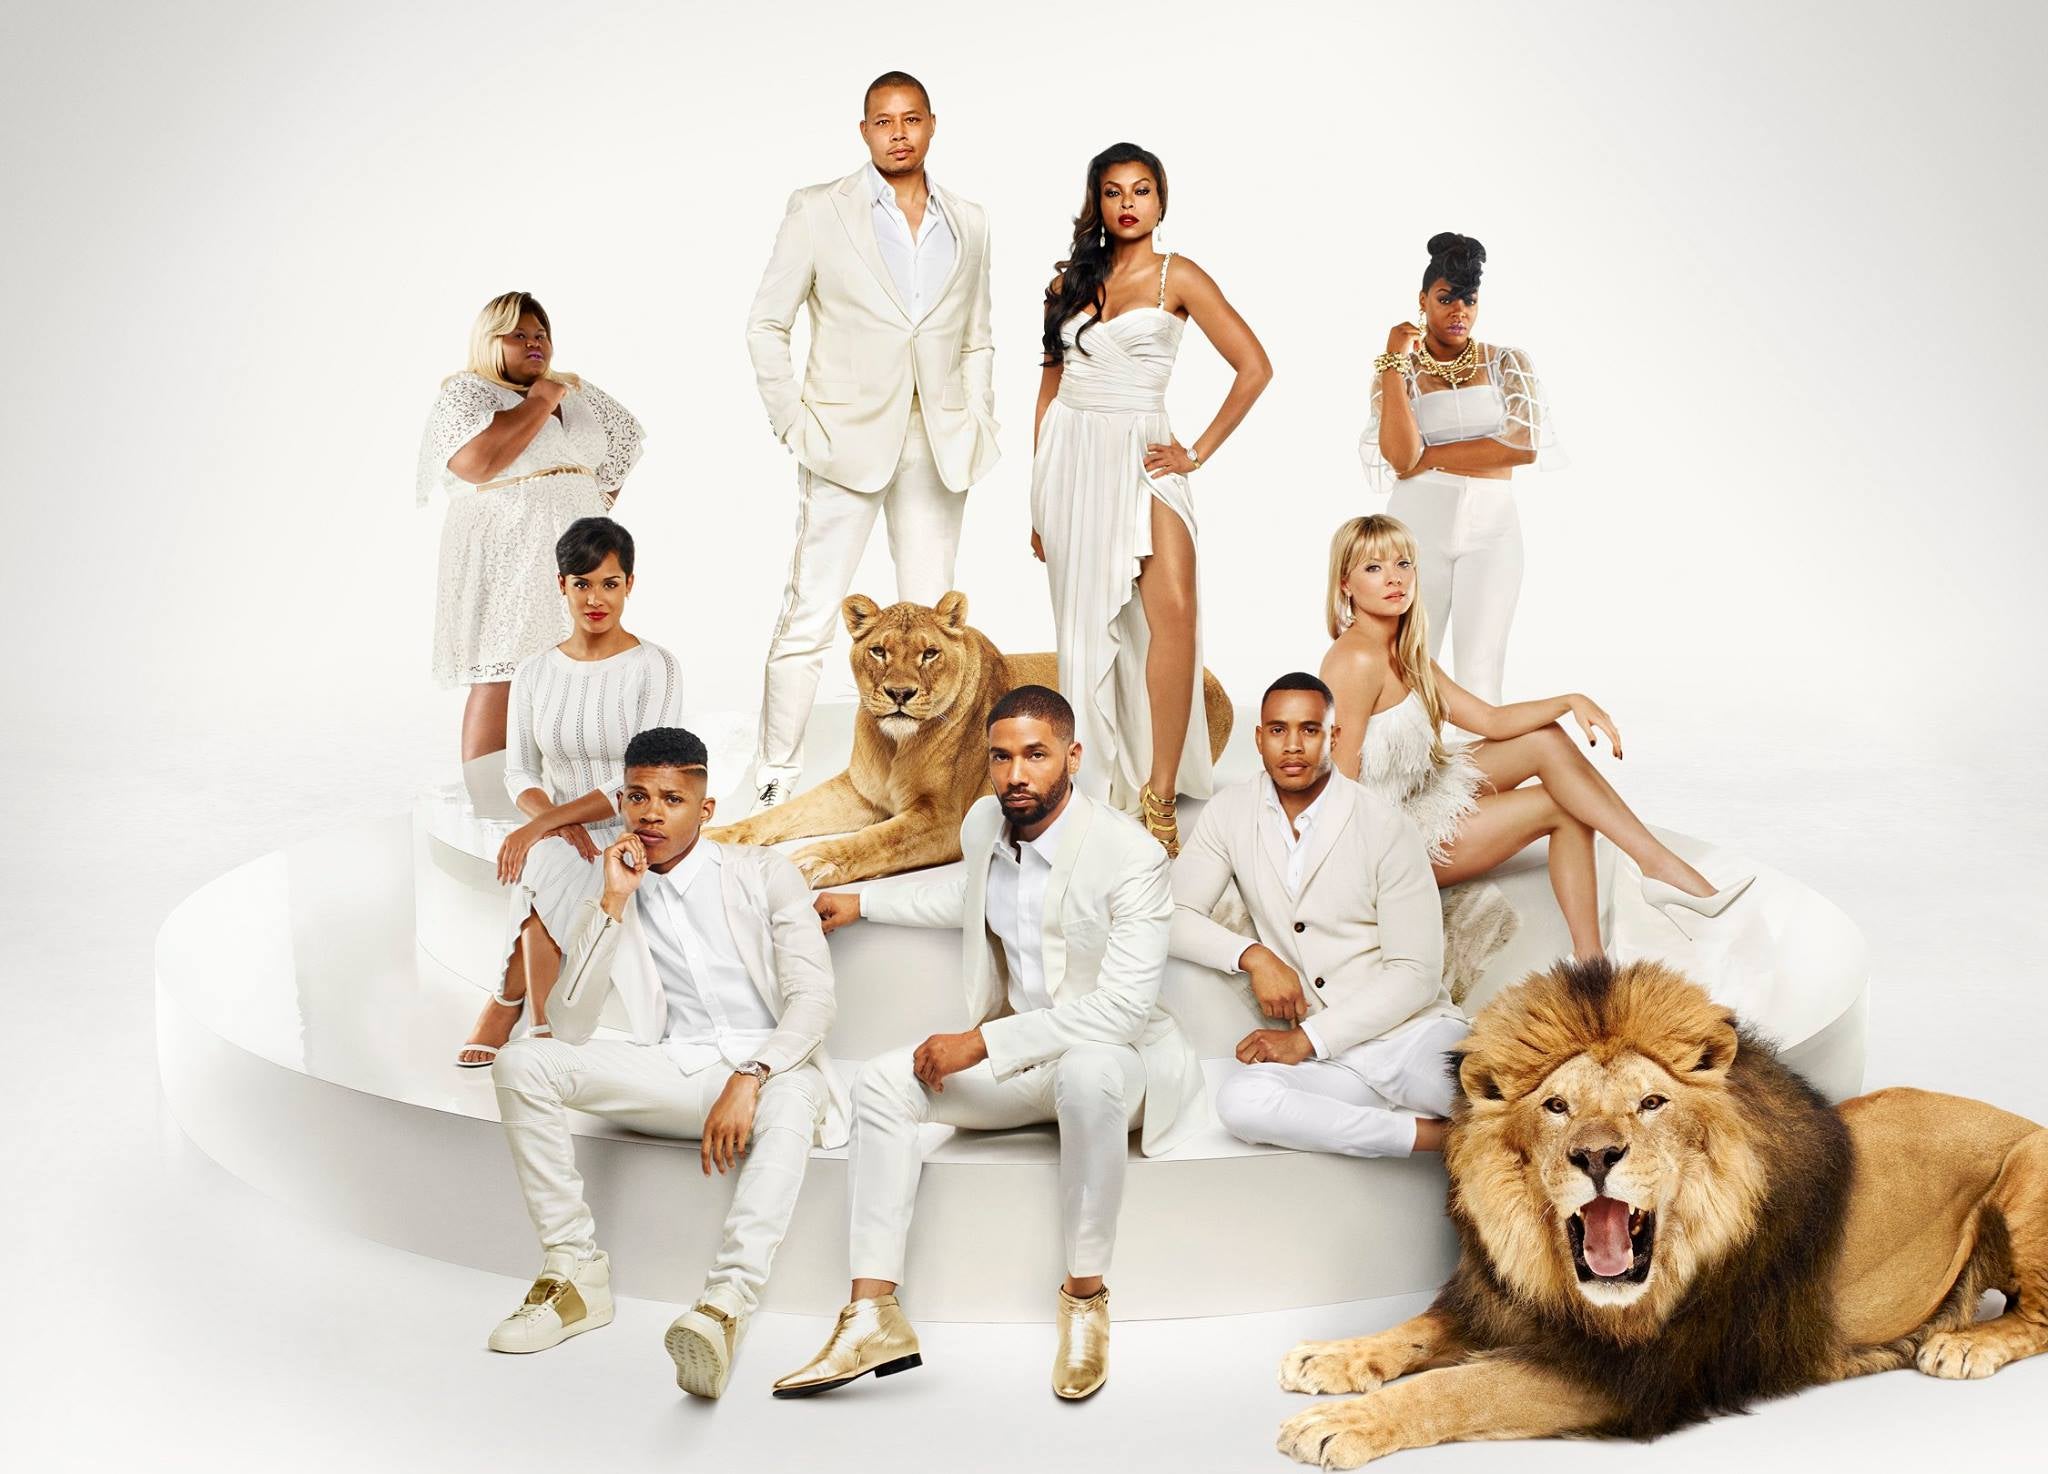 How Well Do You Know the Actors of 'Empire'? Take Our Quiz!
